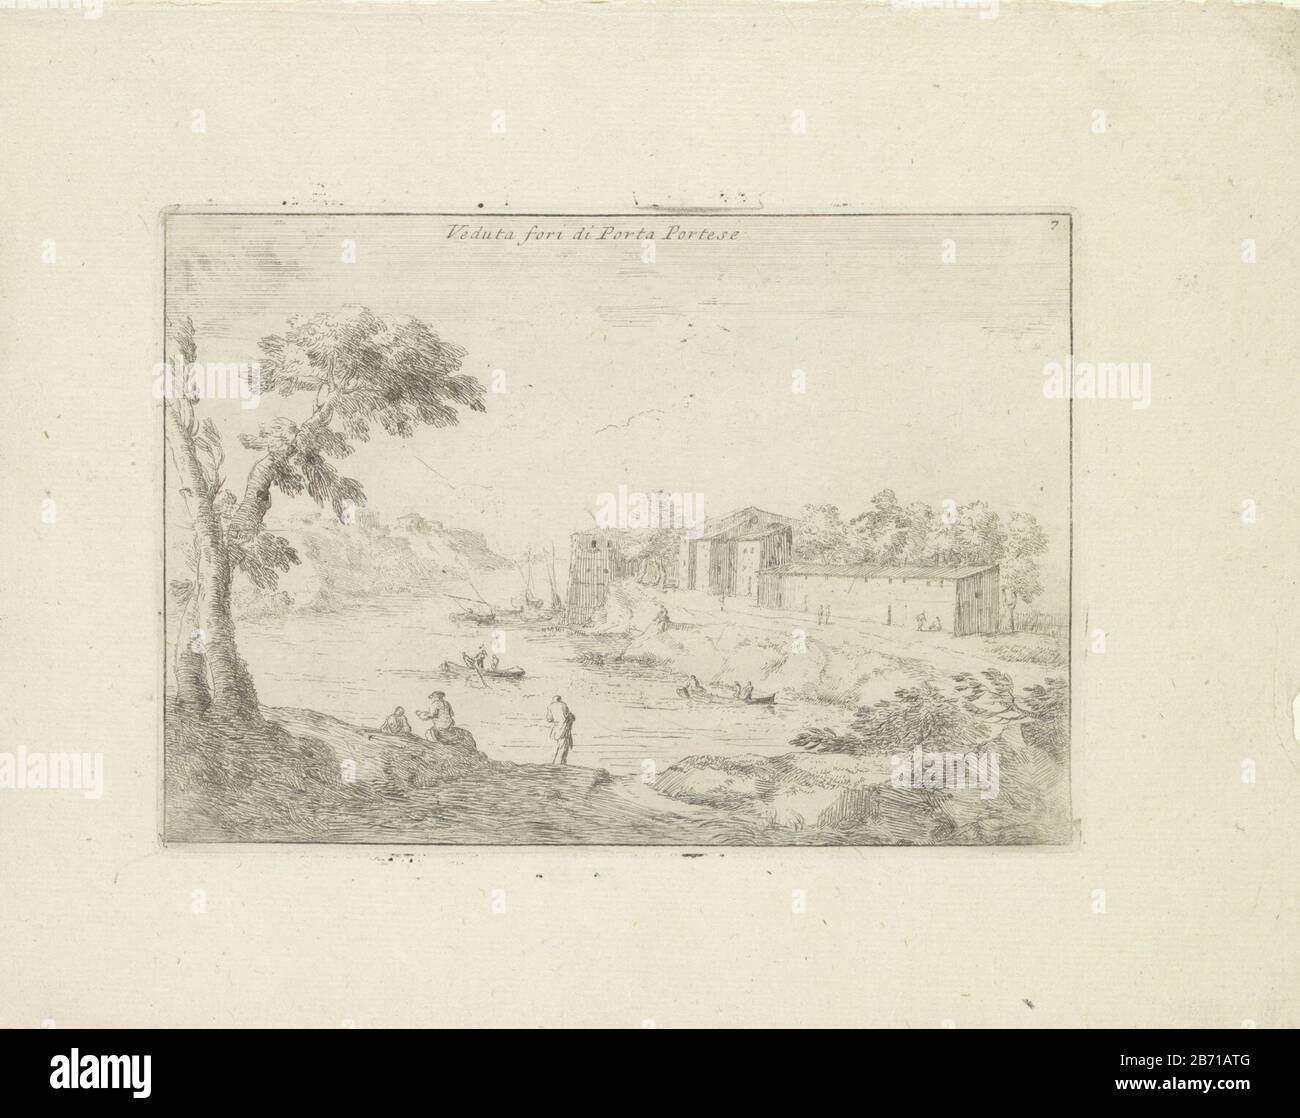 Landschap met de Porta Portese Veduta fori di Porta Portese (titel op object) Varie Vedute (serietitel) Landscape with the Porta Portese in Rome. Men rowing in boats on the Tiber. Middle above the title. Numbered right: 7. Manufacturer : print maker: Paolo Trapanesi To own design of: Paolo Anesi Place manufacture: Rome Date: 1725 Physical characteristics: etching material: paper Technique: etching dimensions: plate edge: H 135 mm × W 191 mmToelichtingPrent 7 from the series: Varie Vedute by Paolo Anesi . Subject: cityscapes and landscapes with human structures river where Rome Porta Portes Tib Stock Photo